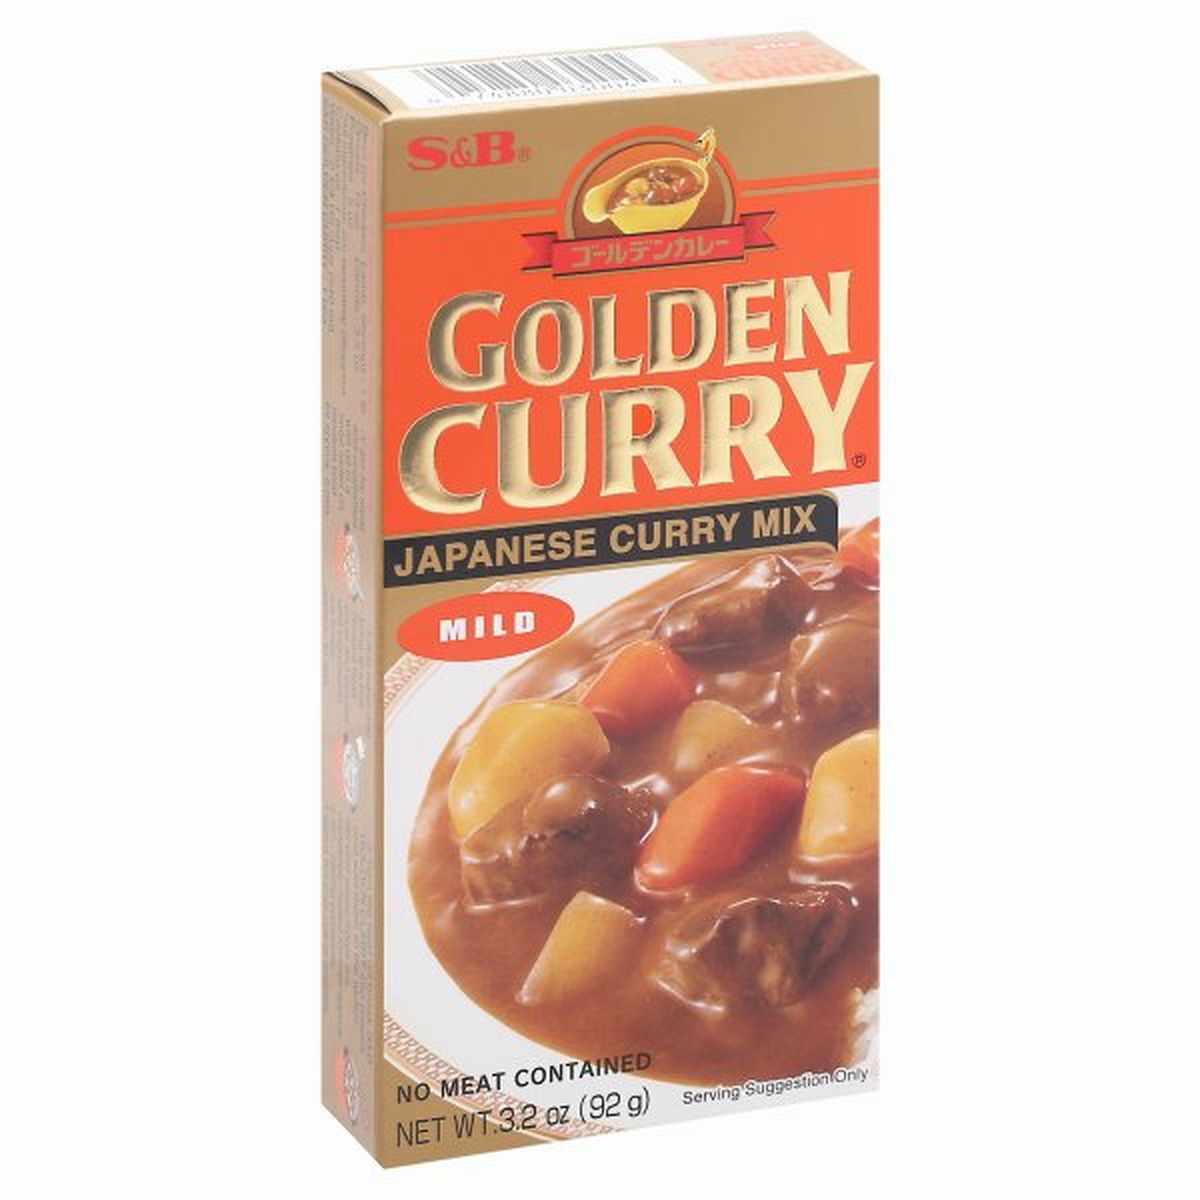 Calories in S&b Golden Curry Curry Mix, Japanese, Mild